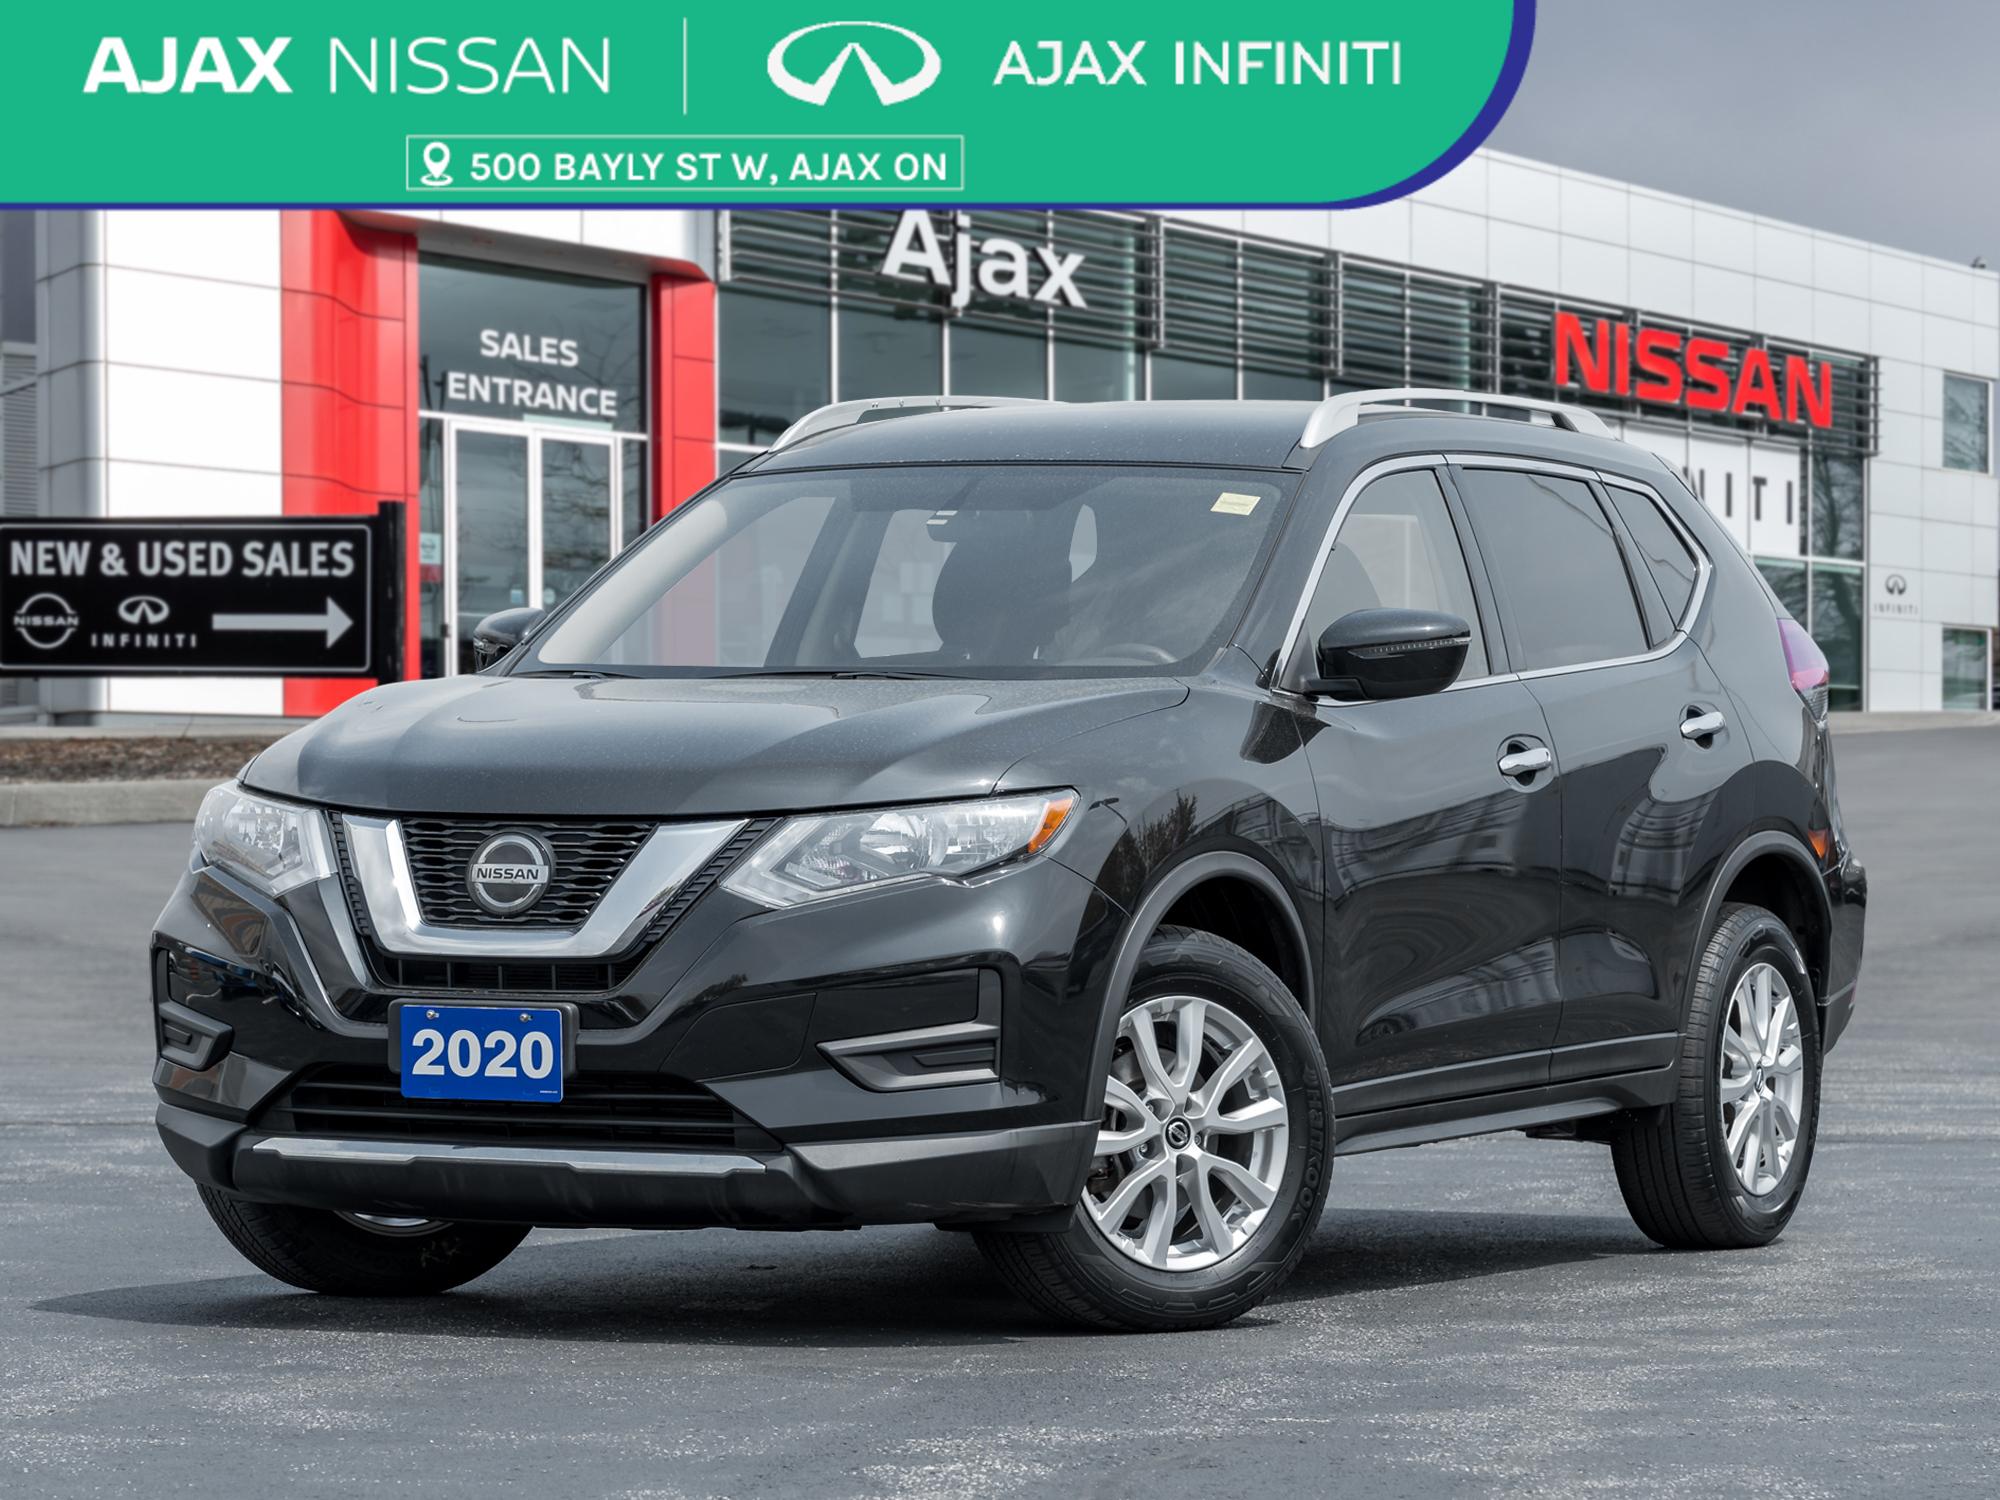 2020 Nissan Rogue AWD - ONE OWNER CLEAN CARFAX! SPECIAL EDITION!